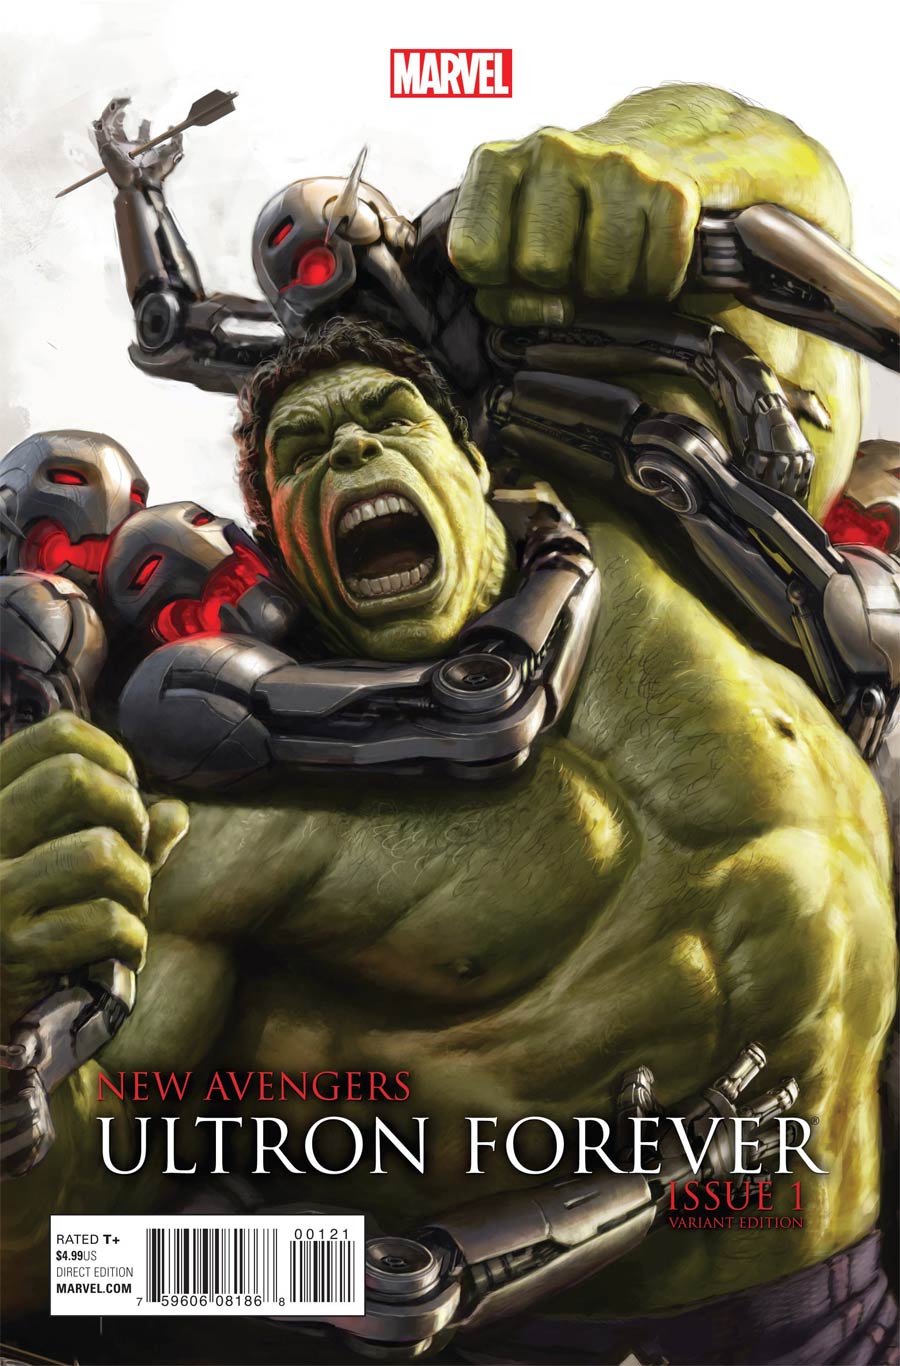 New Avengers Ultron Forever #1 Cover B Incentive Avengers Age Of Ultron Movie Connecting E Variant Cover (Ultron Forever Part 2)